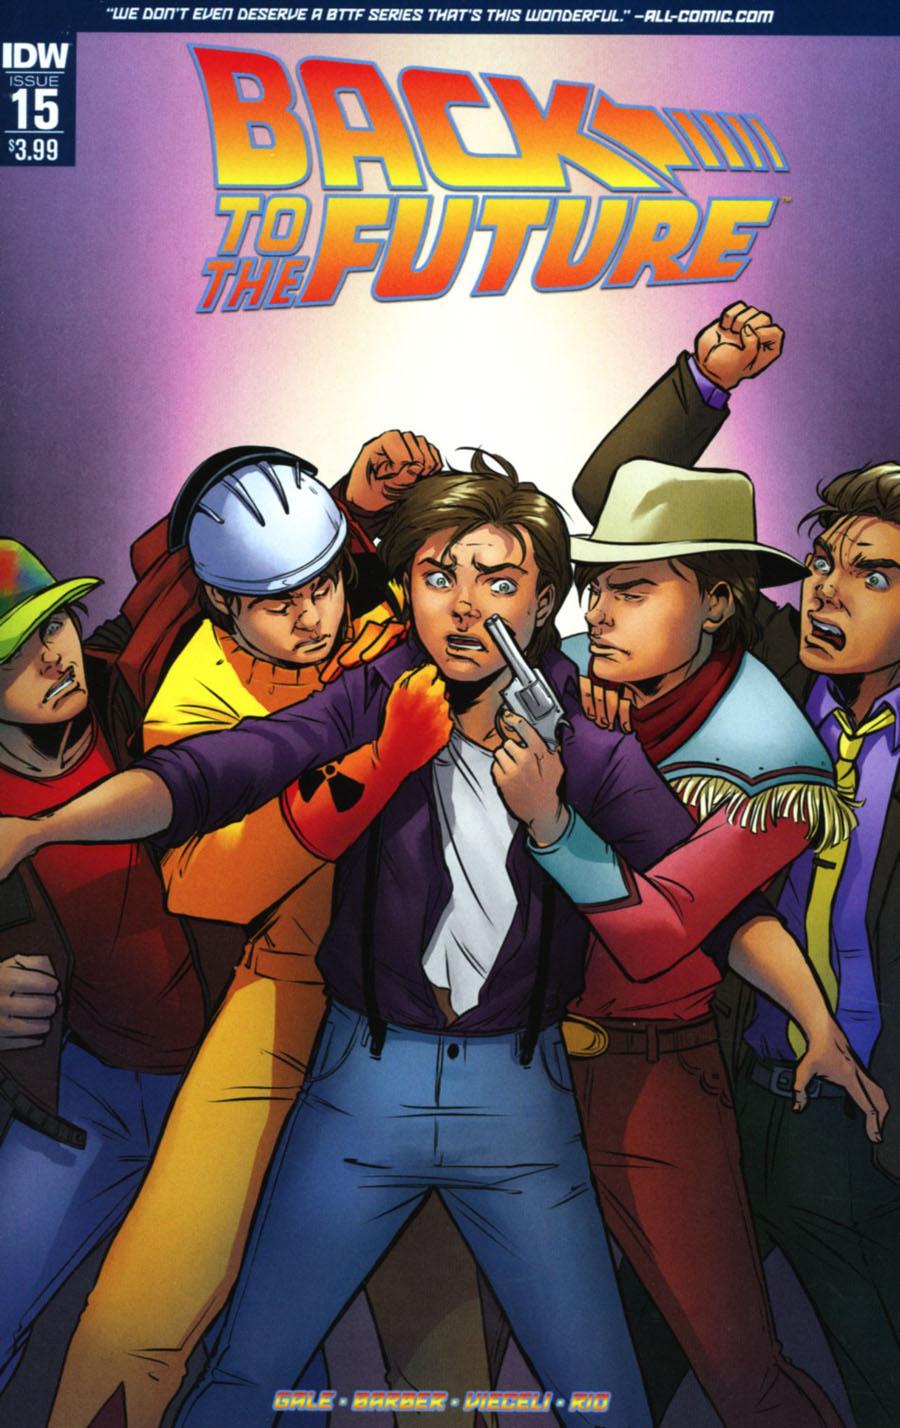 Back To The Future Vol. 2 #15